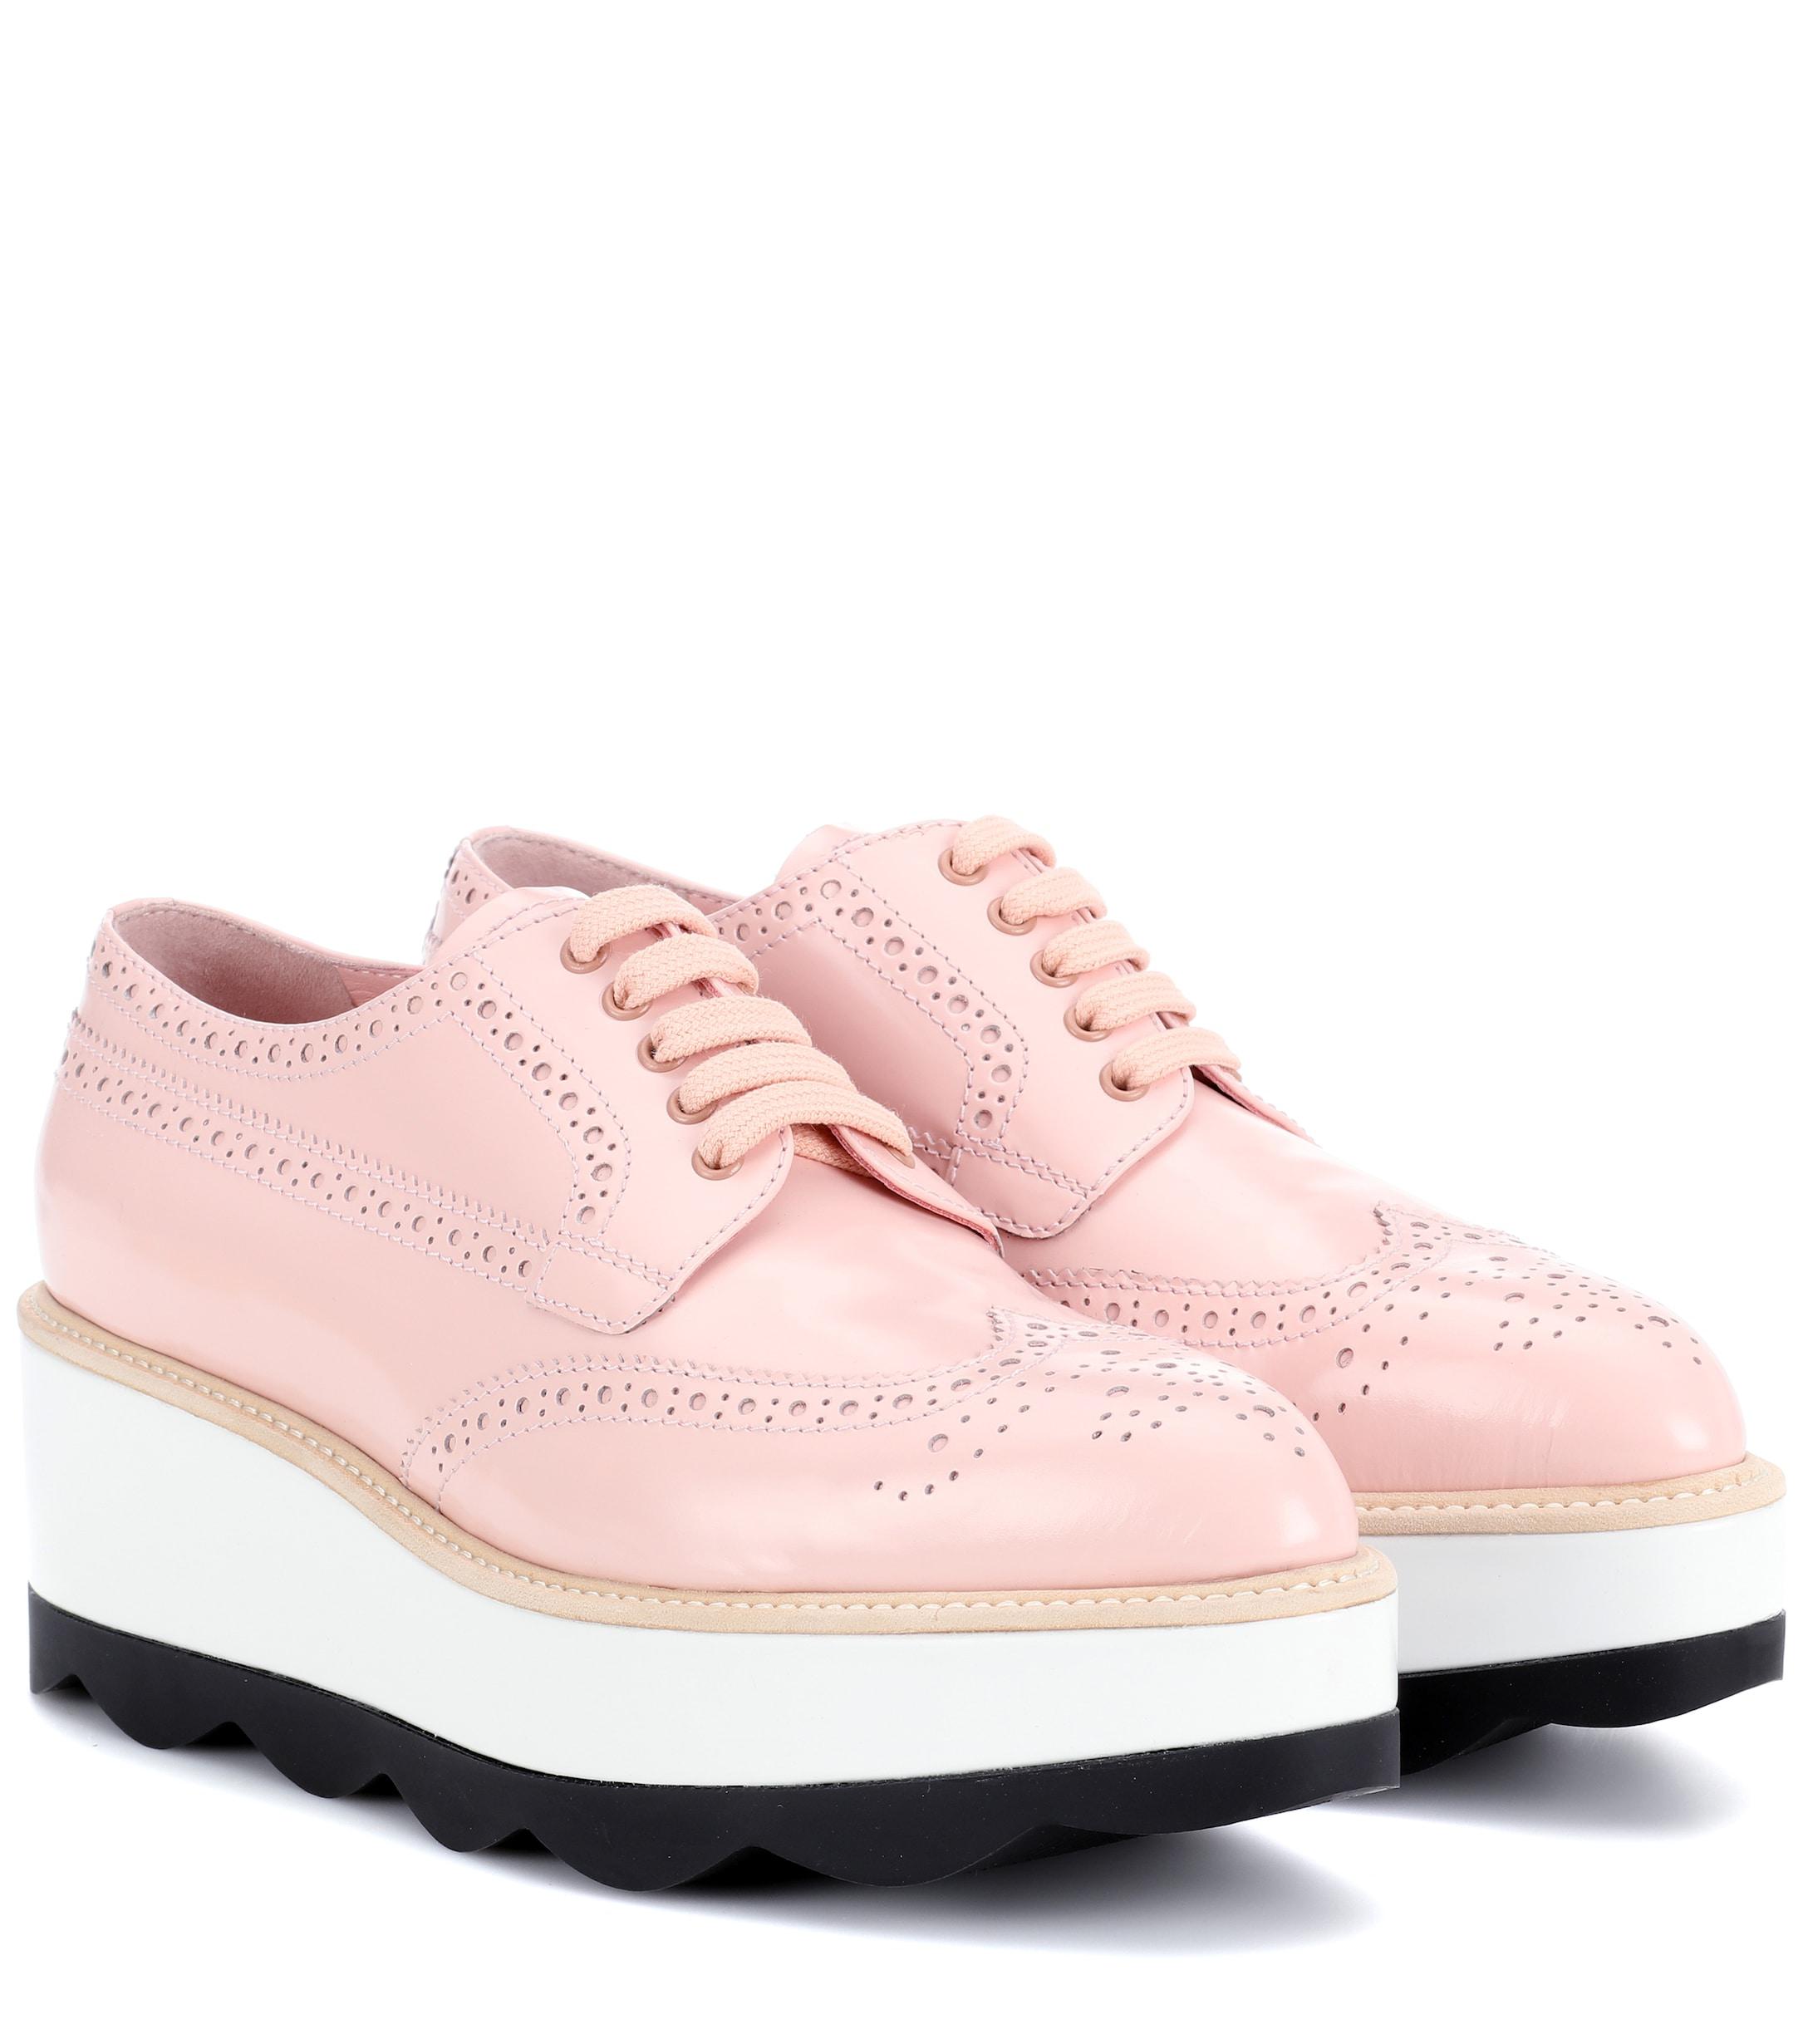 Prada Leather Platform Oxford Shoes in Pink | Lyst